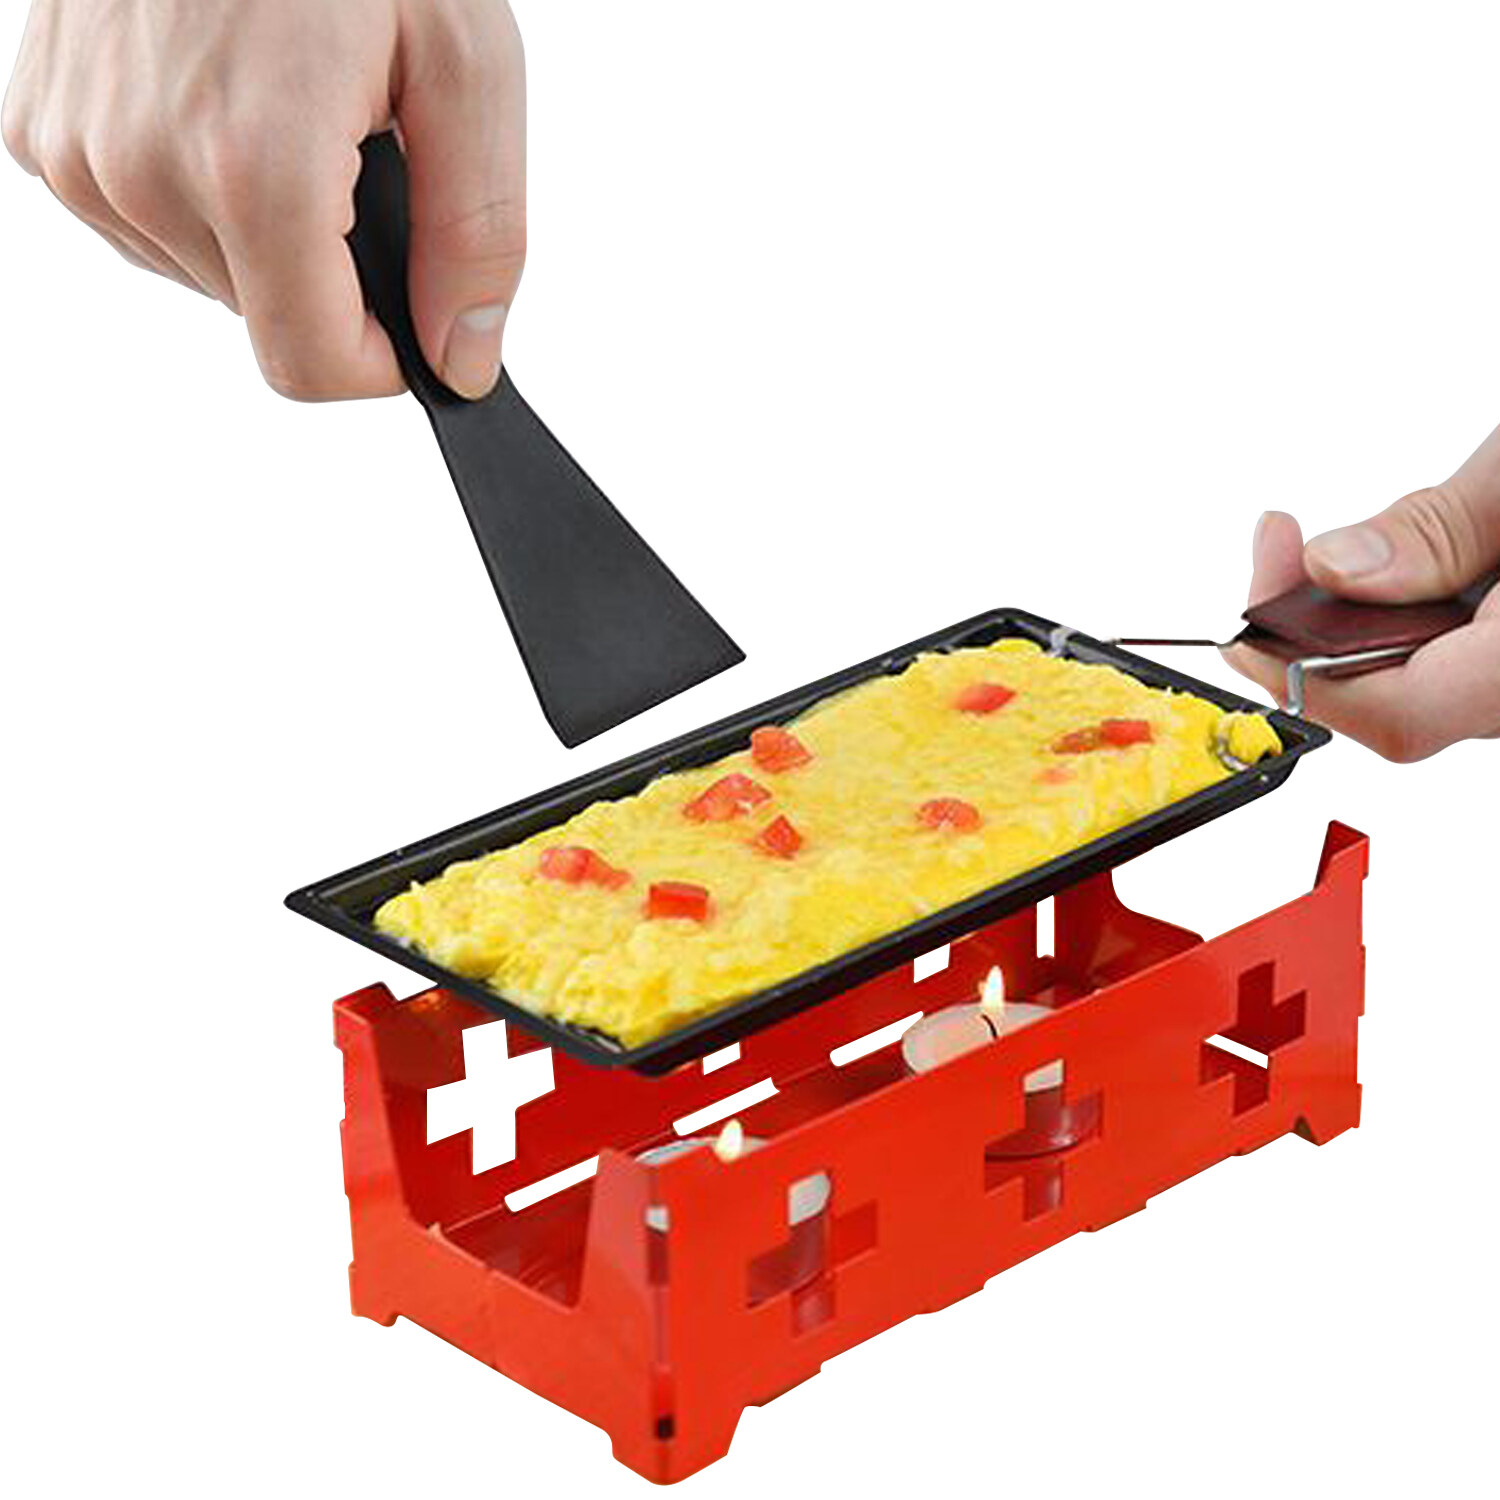 Jullyend Non-Stick Raclette Grill Set Mini Cheese Melting Pan with Foldable Wooden Handle Cheese Spatula 